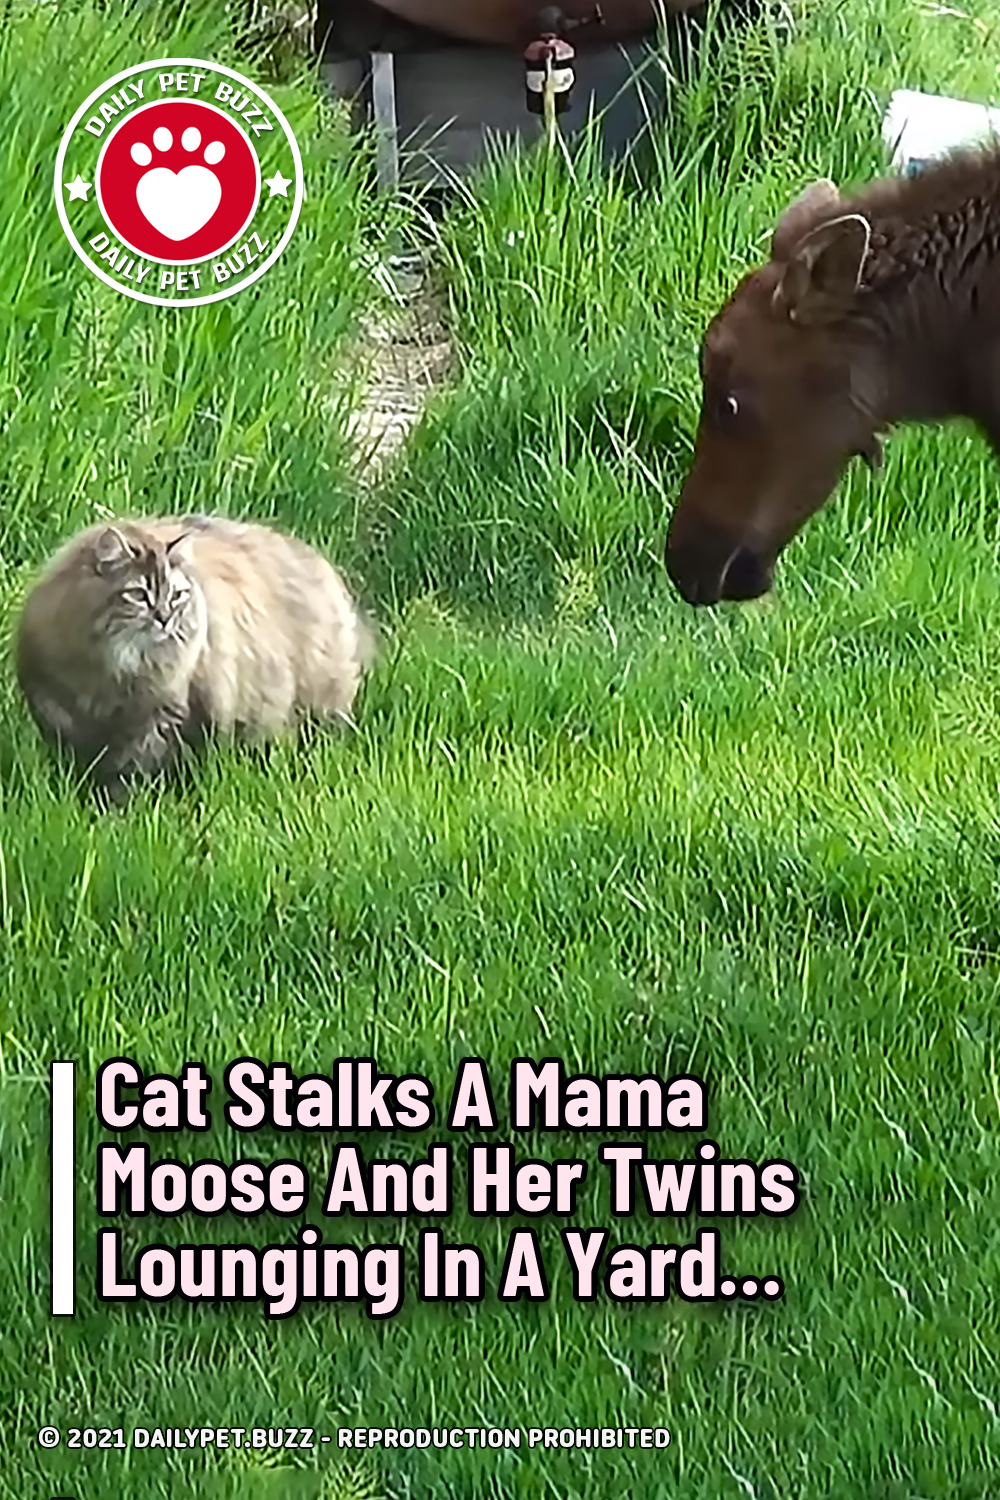 Cat Stalks A Mama Moose And Her Twins Lounging In A Yard...